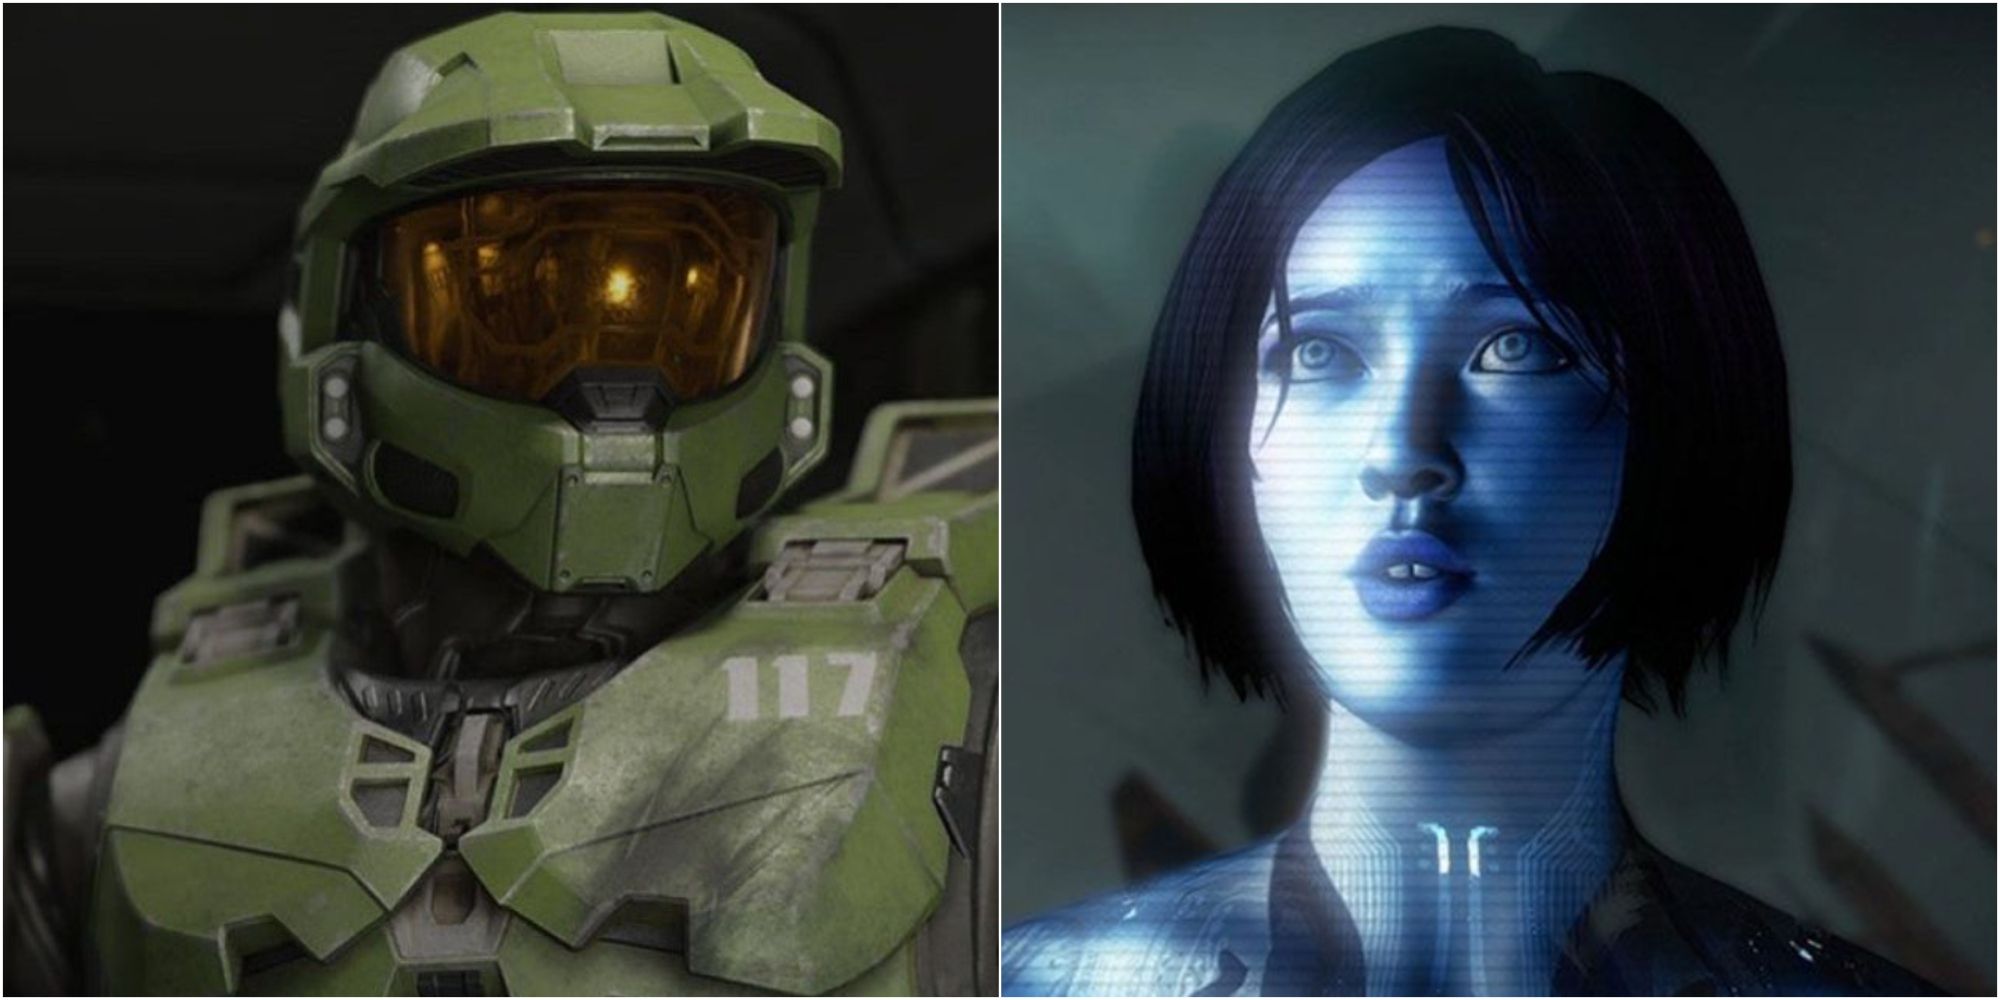 Halo Master Chief And Cortana featured Split Image